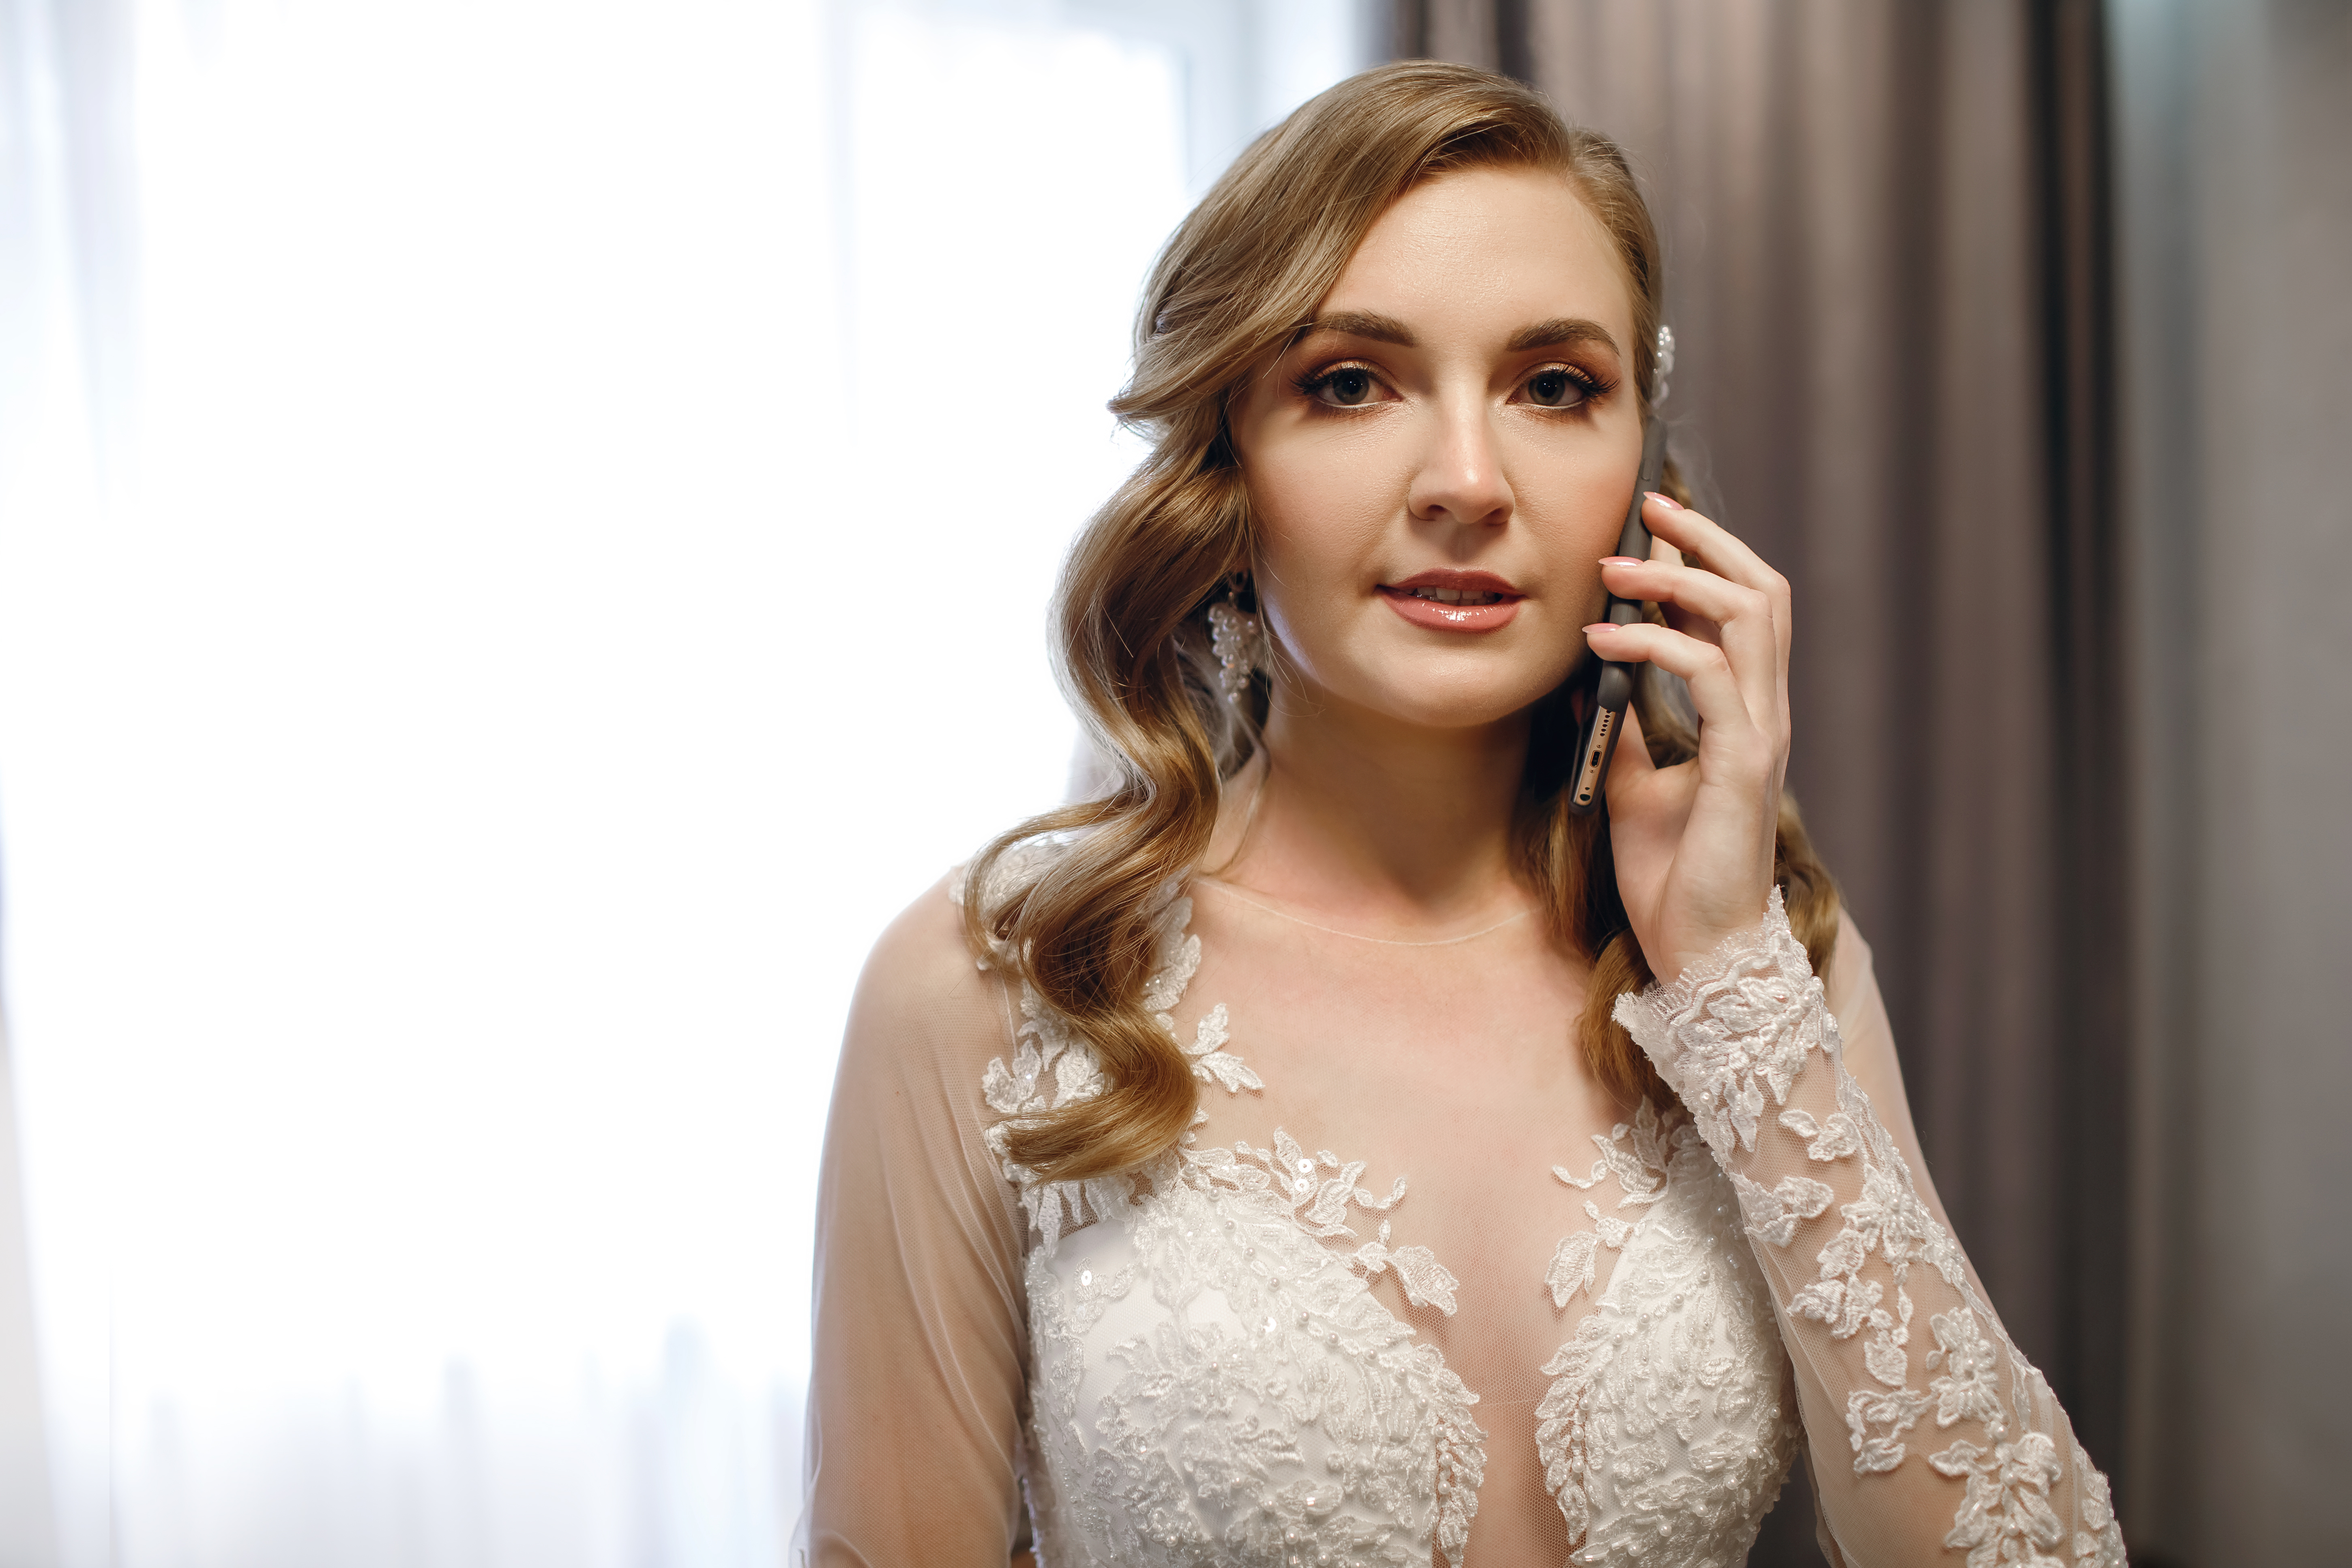 An angry young woman in a wedding dress talking on her phone | Source: Shutterstock